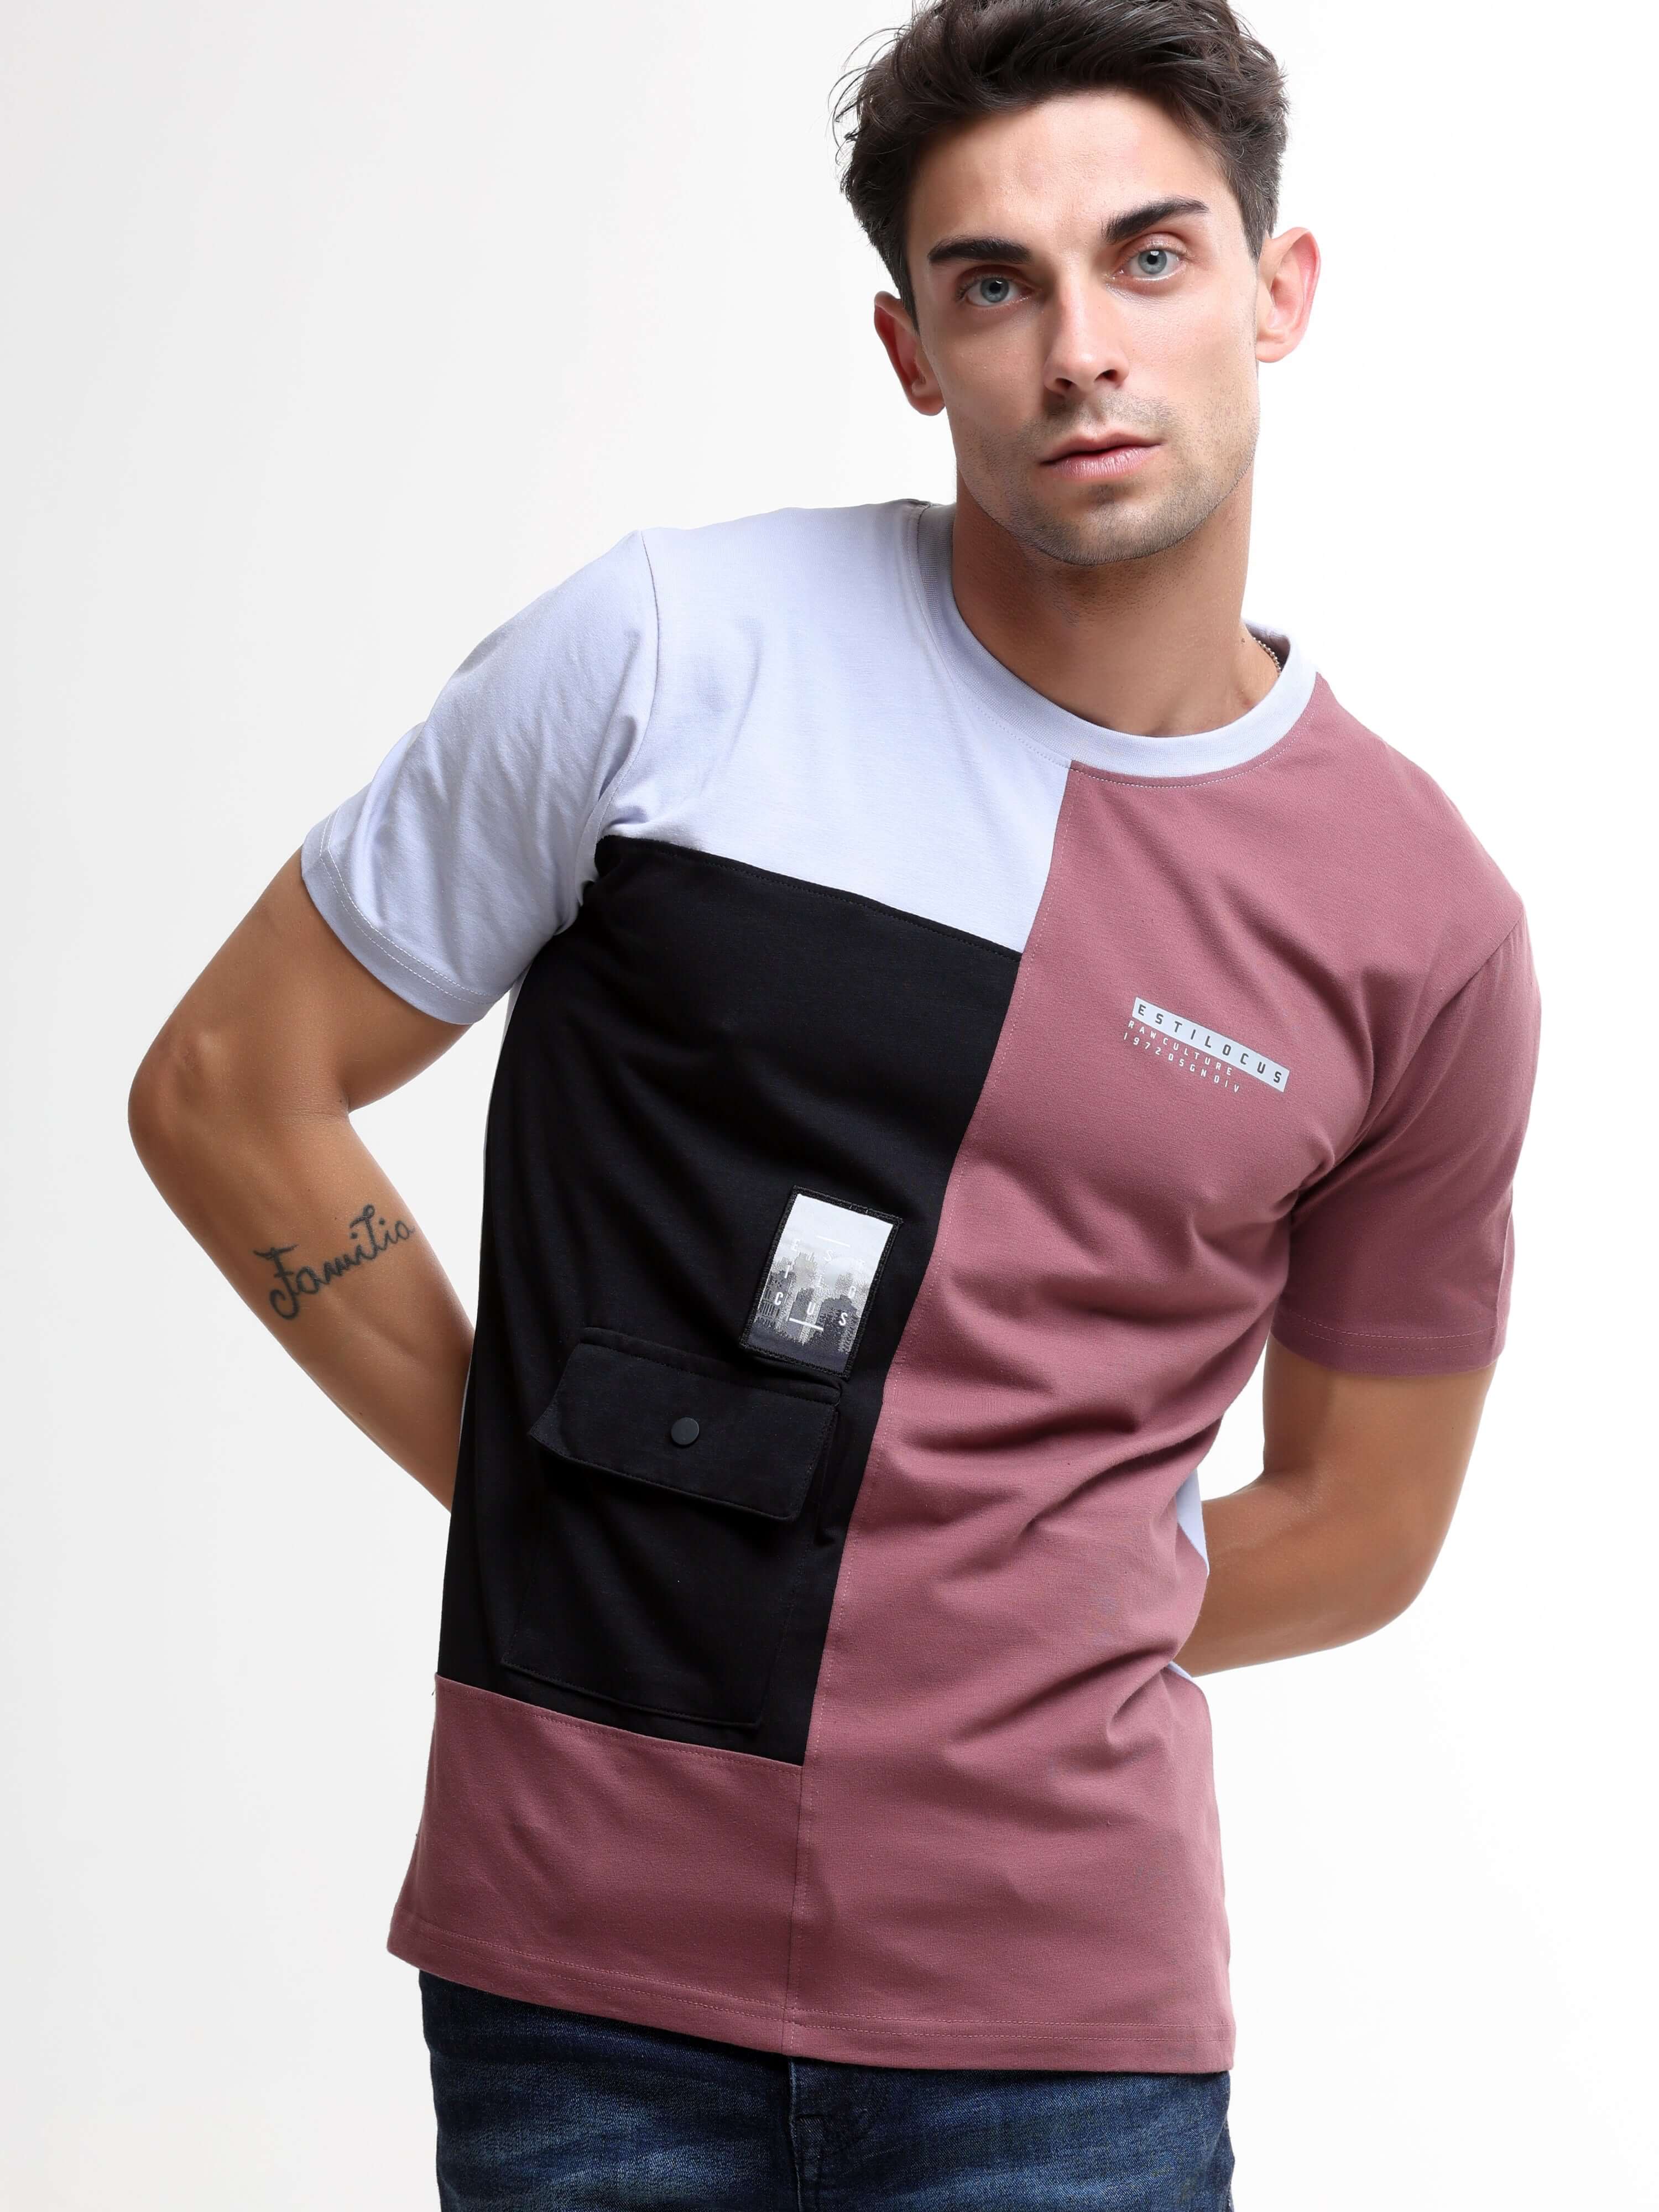 Vigor clay pink light weight tshirt shop online at Estilocus. This relax-fit Cut and Sew T-shirt is comfortable and the perfect essential all year round. Pair it with white jeans and sneakers and layer it up with a denim jacket for a casual and put-togeth